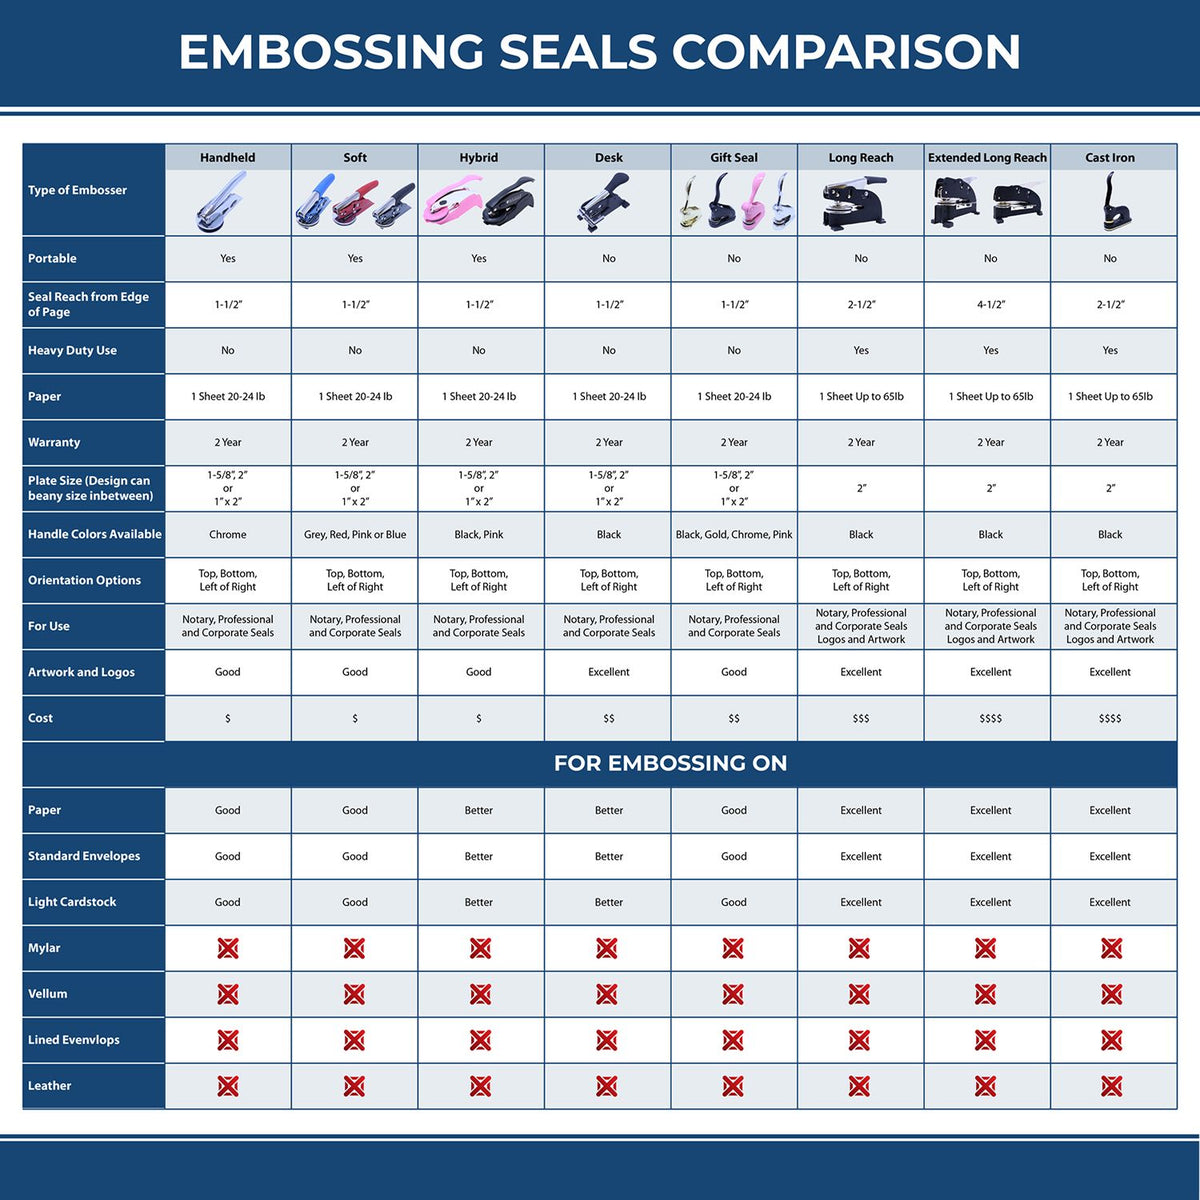 A comparison chart for the different types of mount models available for the Hybrid South Dakota Engineer Seal